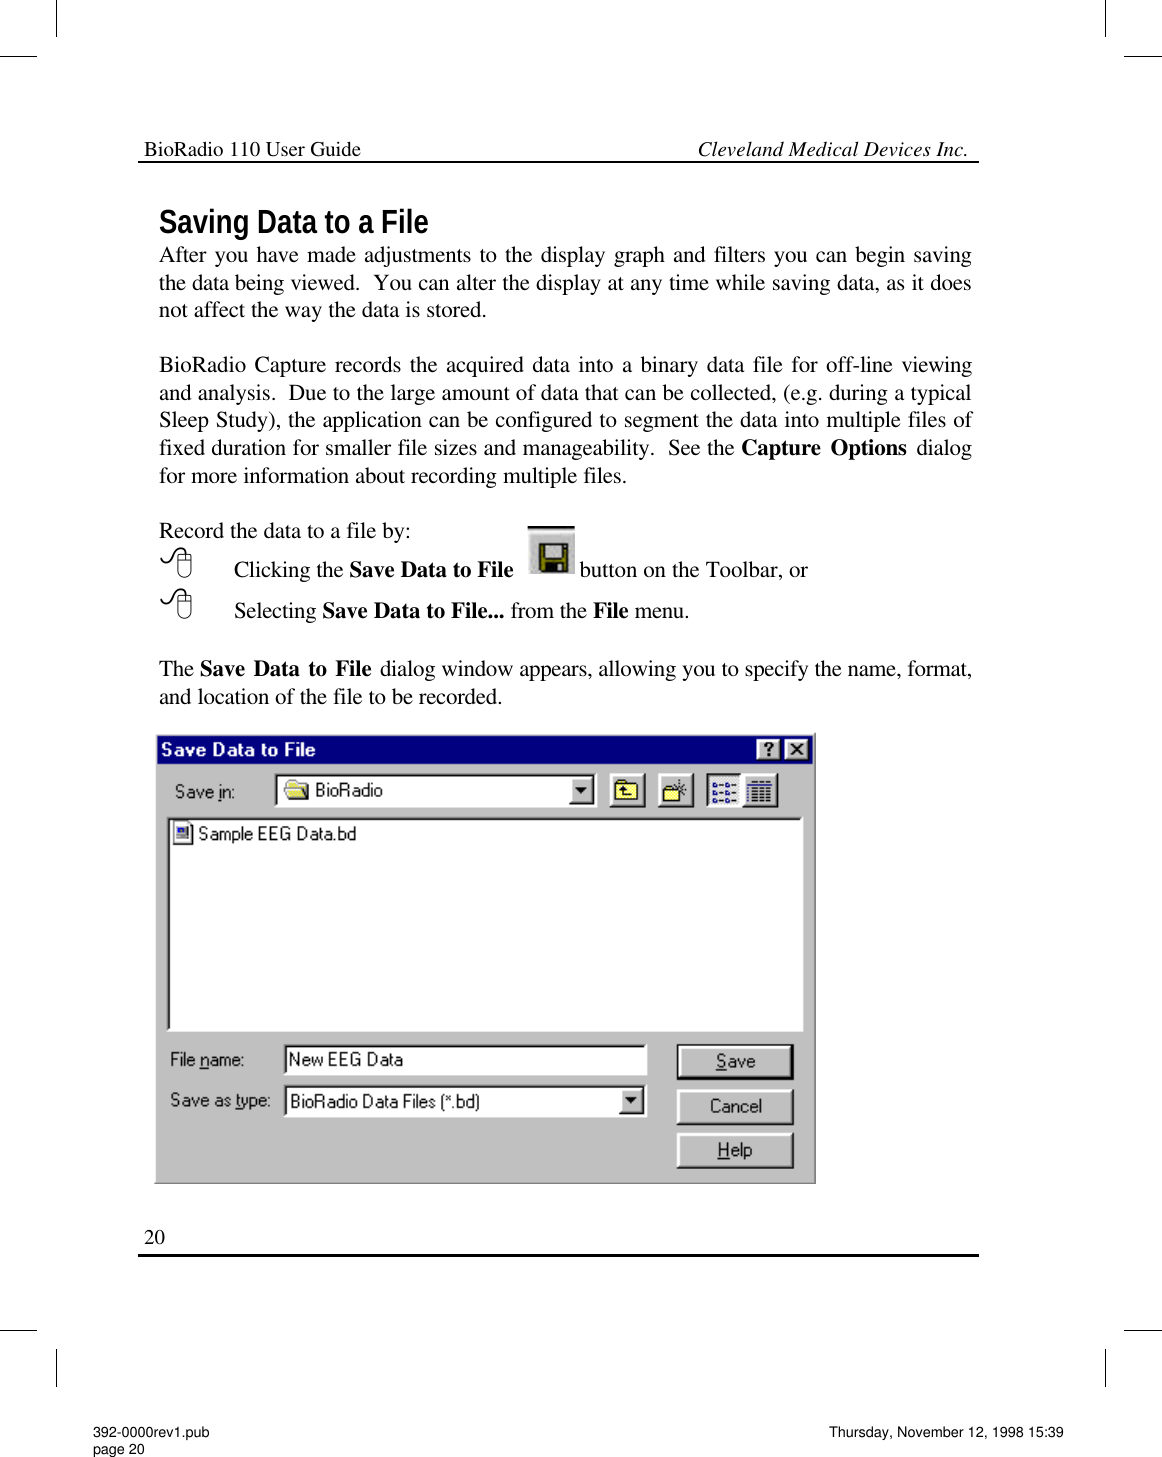 BioRadio 110 User Guide                                                             Cleveland Medical Devices Inc.20 Saving Data to a File After you have made adjustments to the display graph and filters you can begin saving the data being viewed.  You can alter the display at any time while saving data, as it does not affect the way the data is stored.    BioRadio Capture records the acquired data into a binary data file for off-line viewing and analysis.  Due to the large amount of data that can be collected, (e.g. during a typical Sleep Study), the application can be configured to segment the data into multiple files of fixed duration for smaller file sizes and manageability.  See the Capture Options dialog for more information about recording multiple files.  Record the data to a file by:  8  Clicking the Save Data to File  button on the Toolbar, or 8  Selecting Save Data to File... from the File menu.    The Save Data to File dialog window appears, allowing you to specify the name, format, and location of the file to be recorded.   392-0000rev1.pub page 20 Thursday, November 12, 1998 15:39 